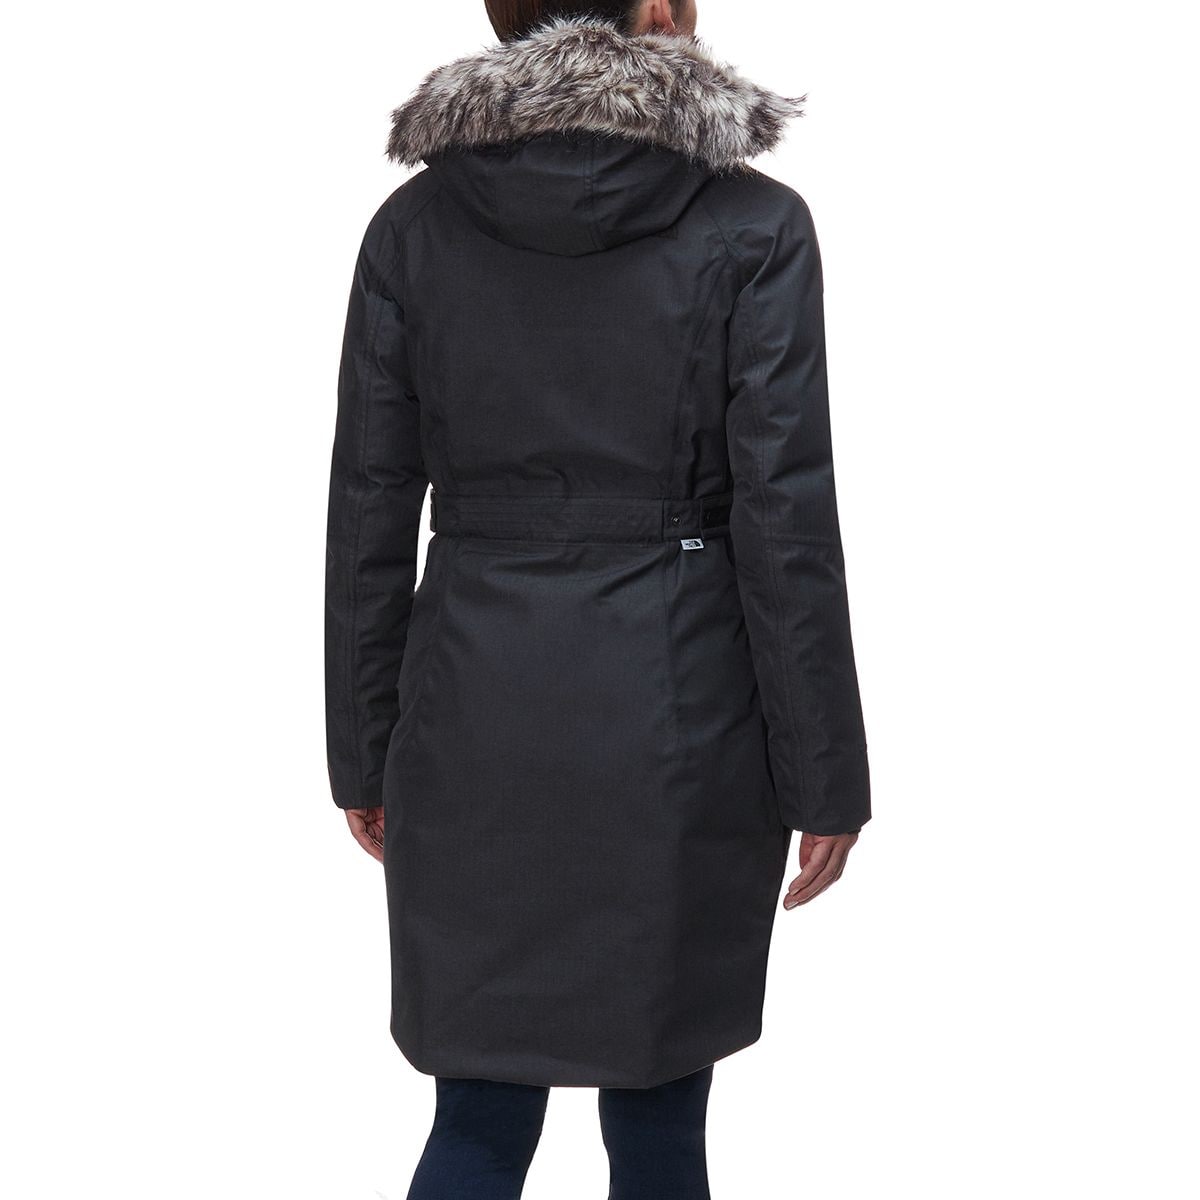 outer boroughs parka womens